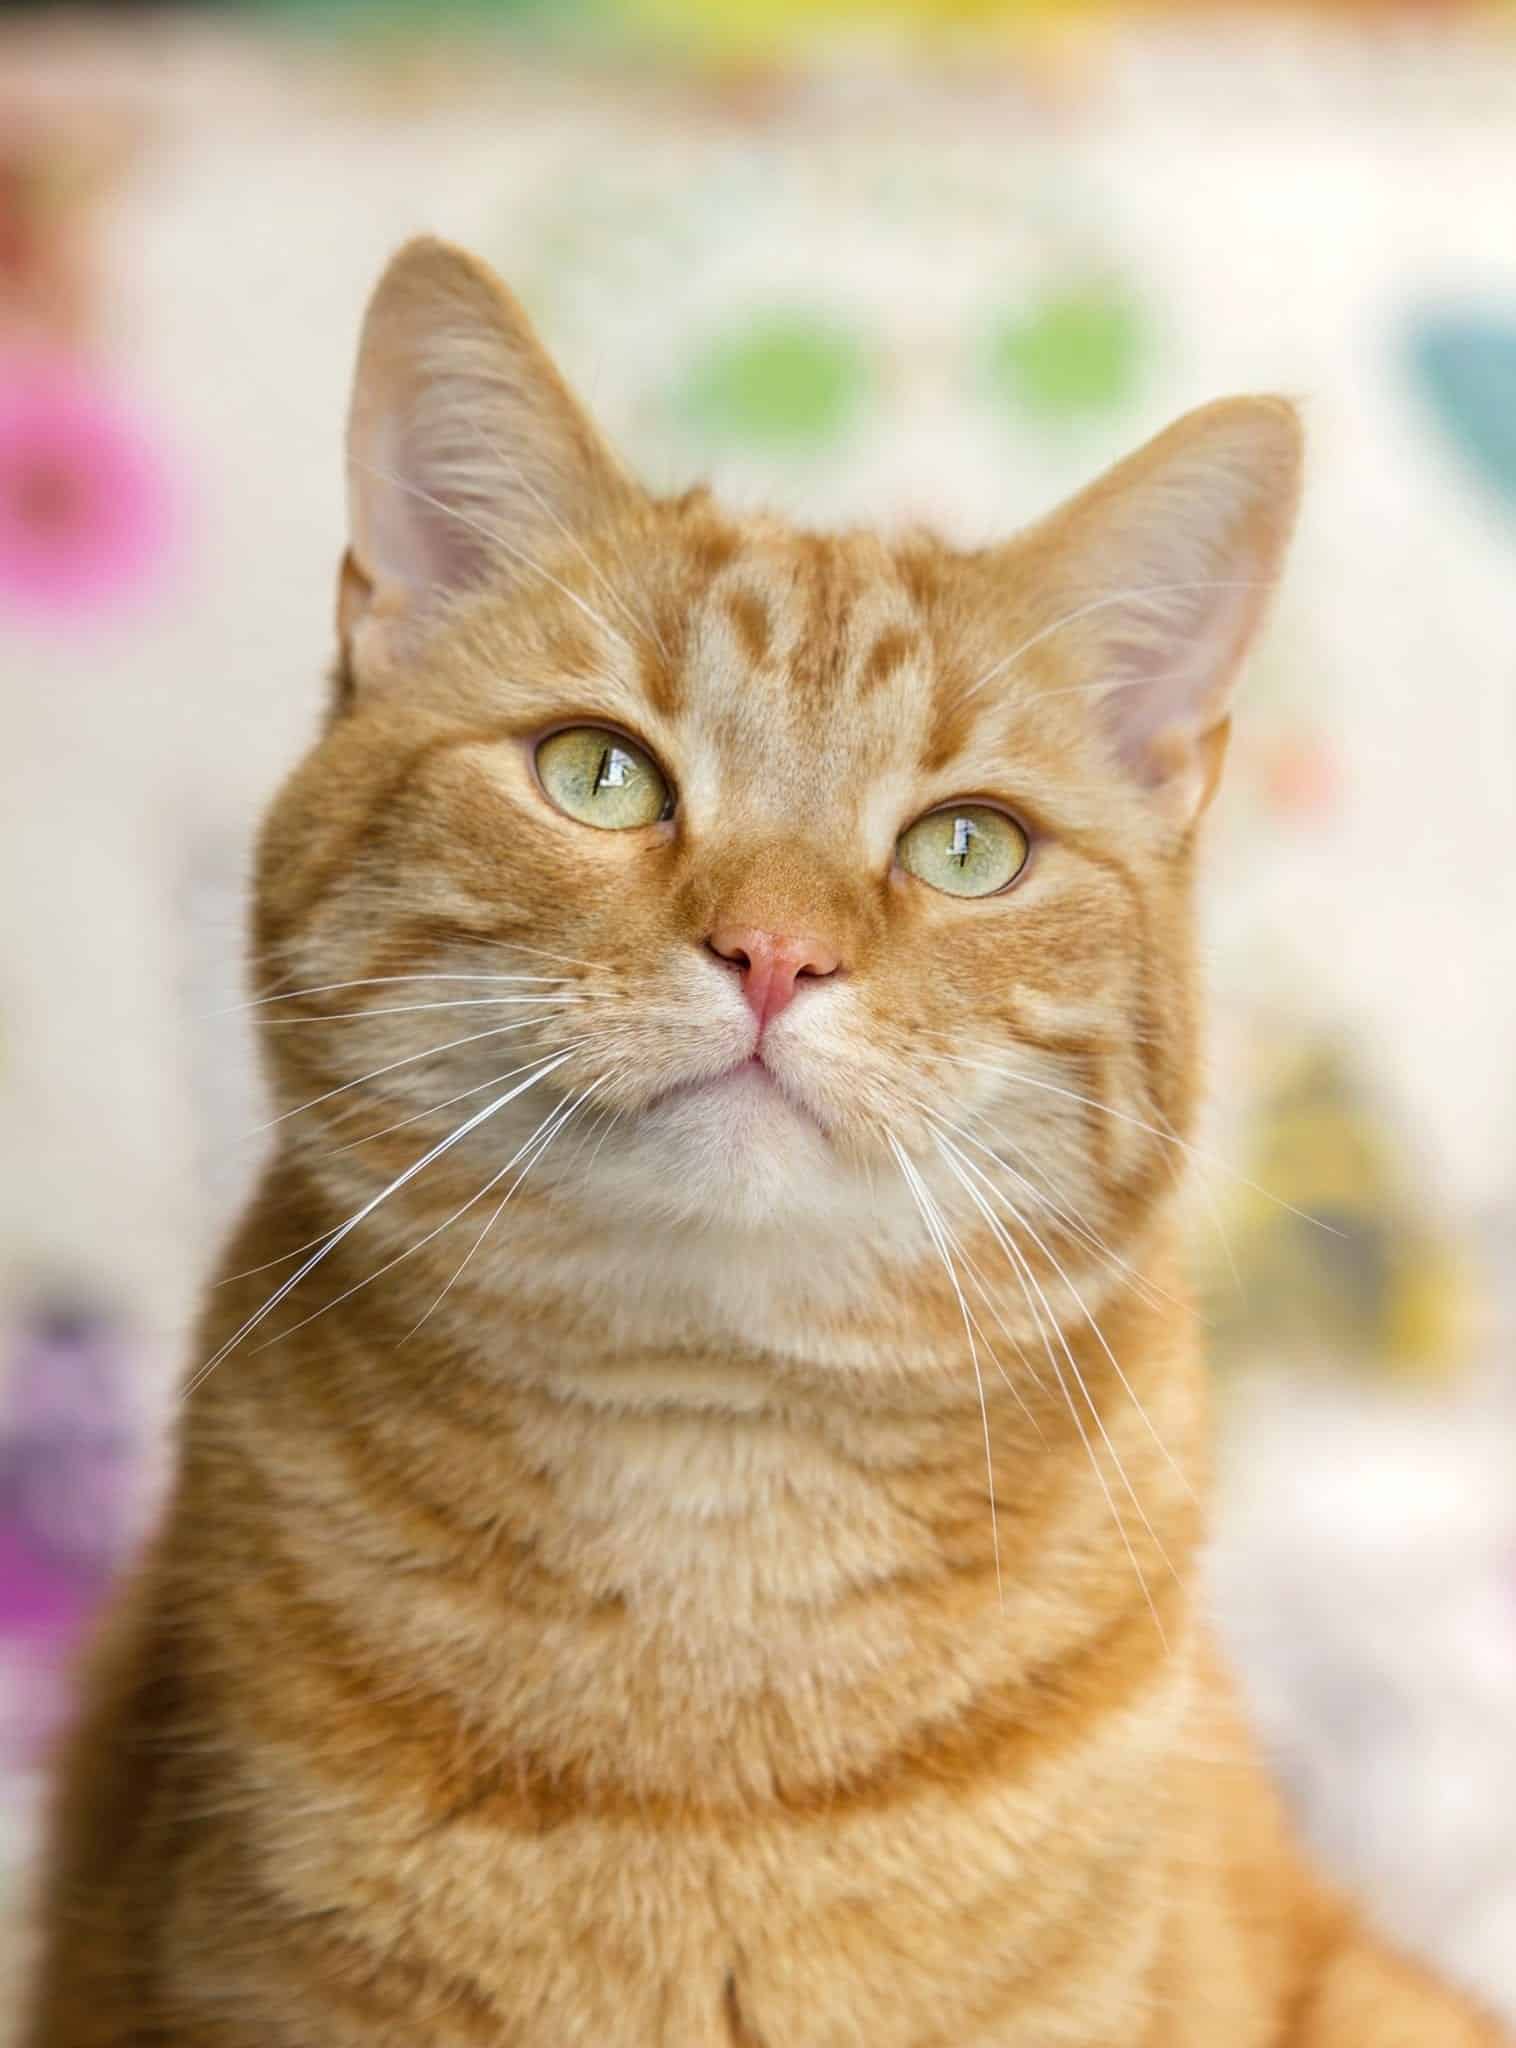 8 Fun Facts About Ginger Tabby Cats - Cole & Marmalade